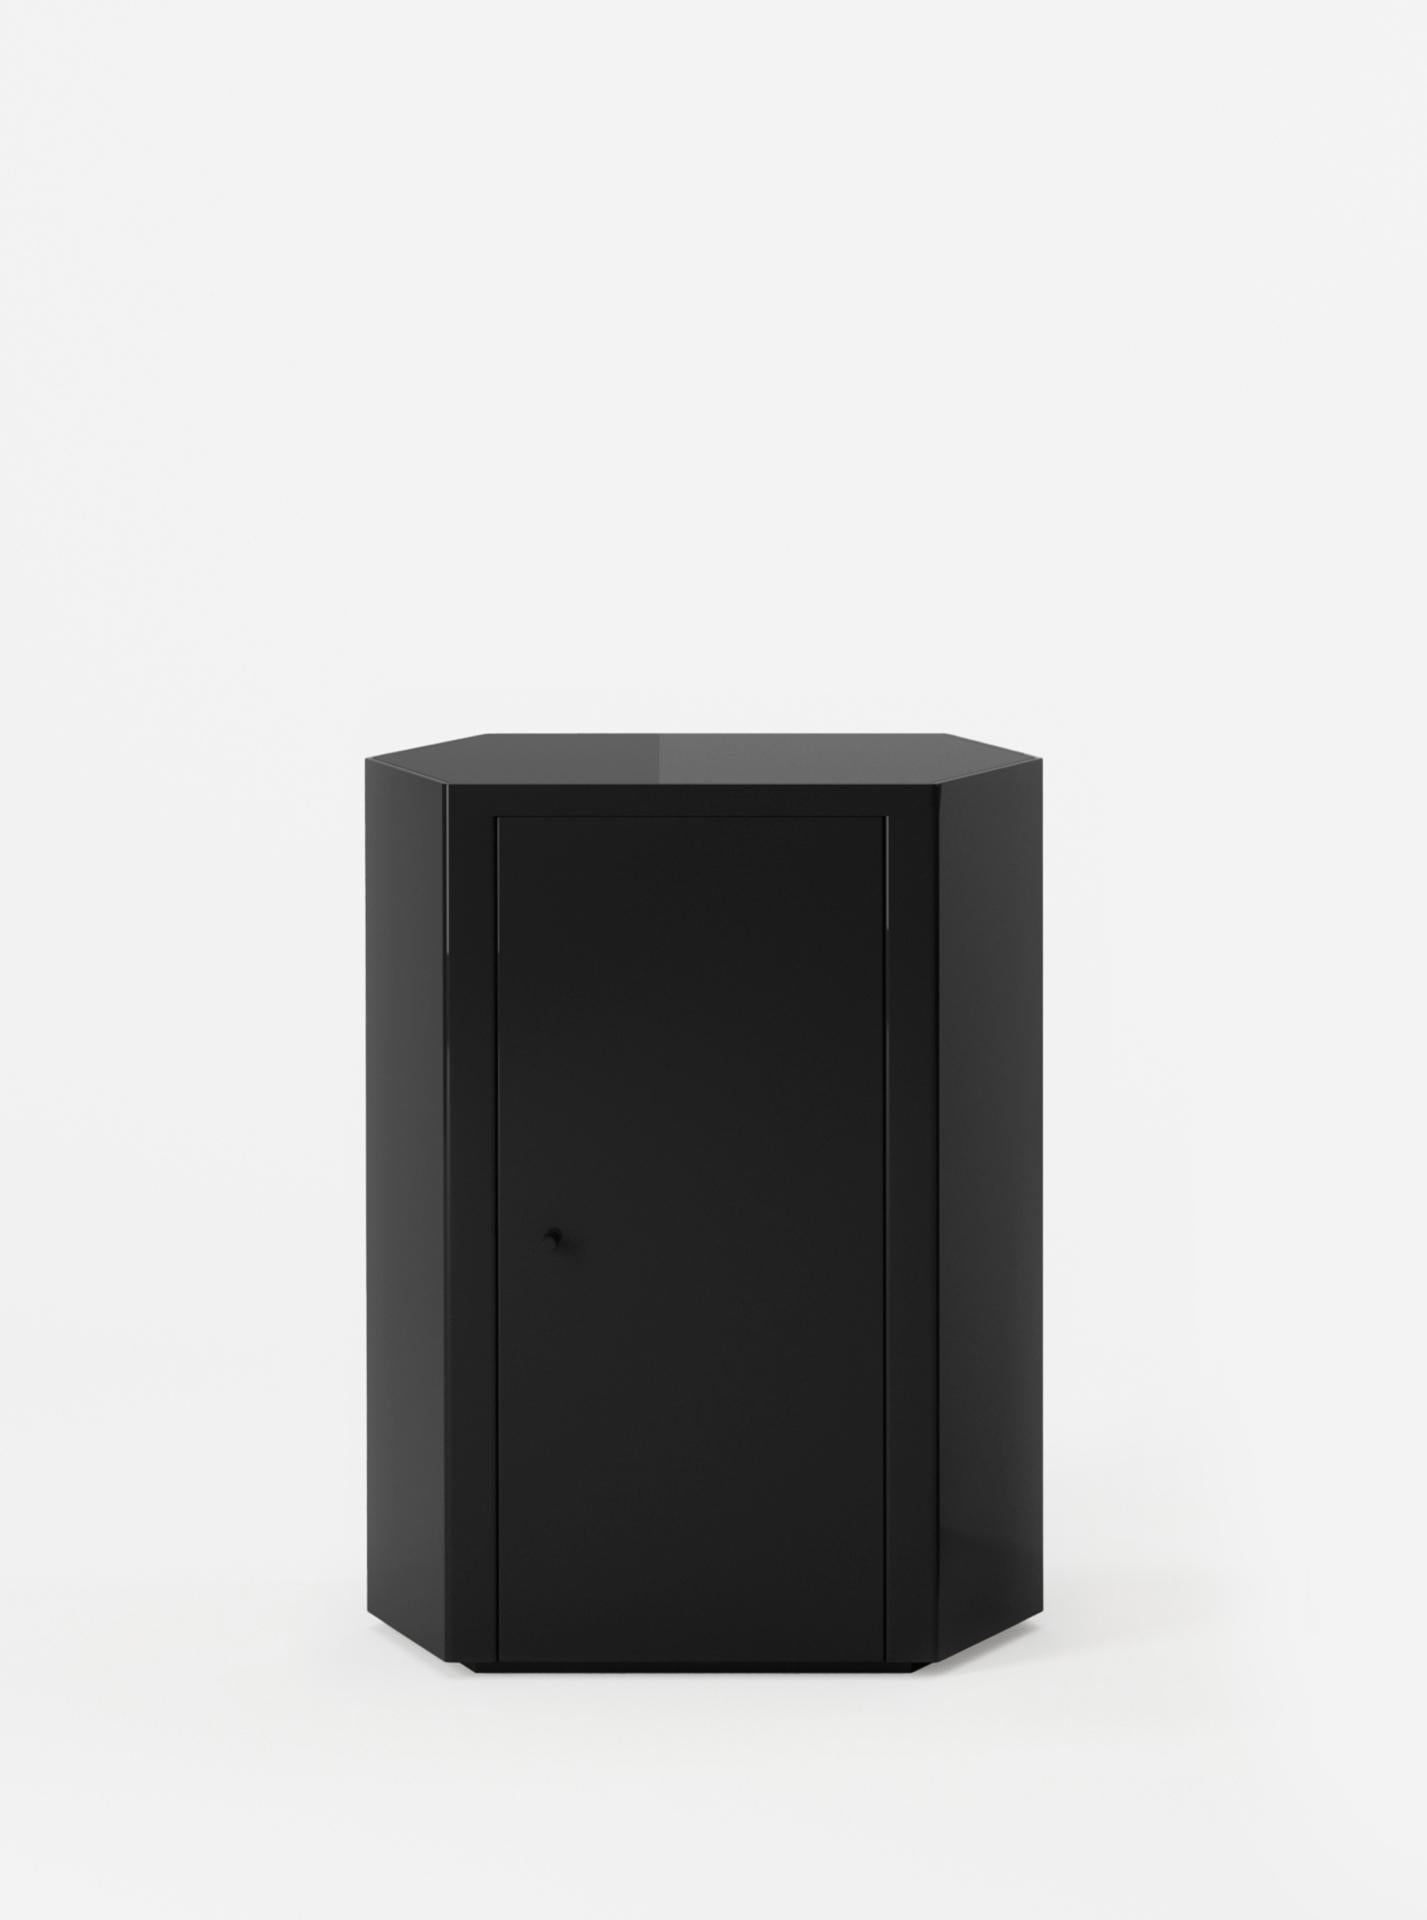 Minimalist Pair of Park Night Stands in Pitch Black Lacquer by Yaniv Chen for Lemon For Sale